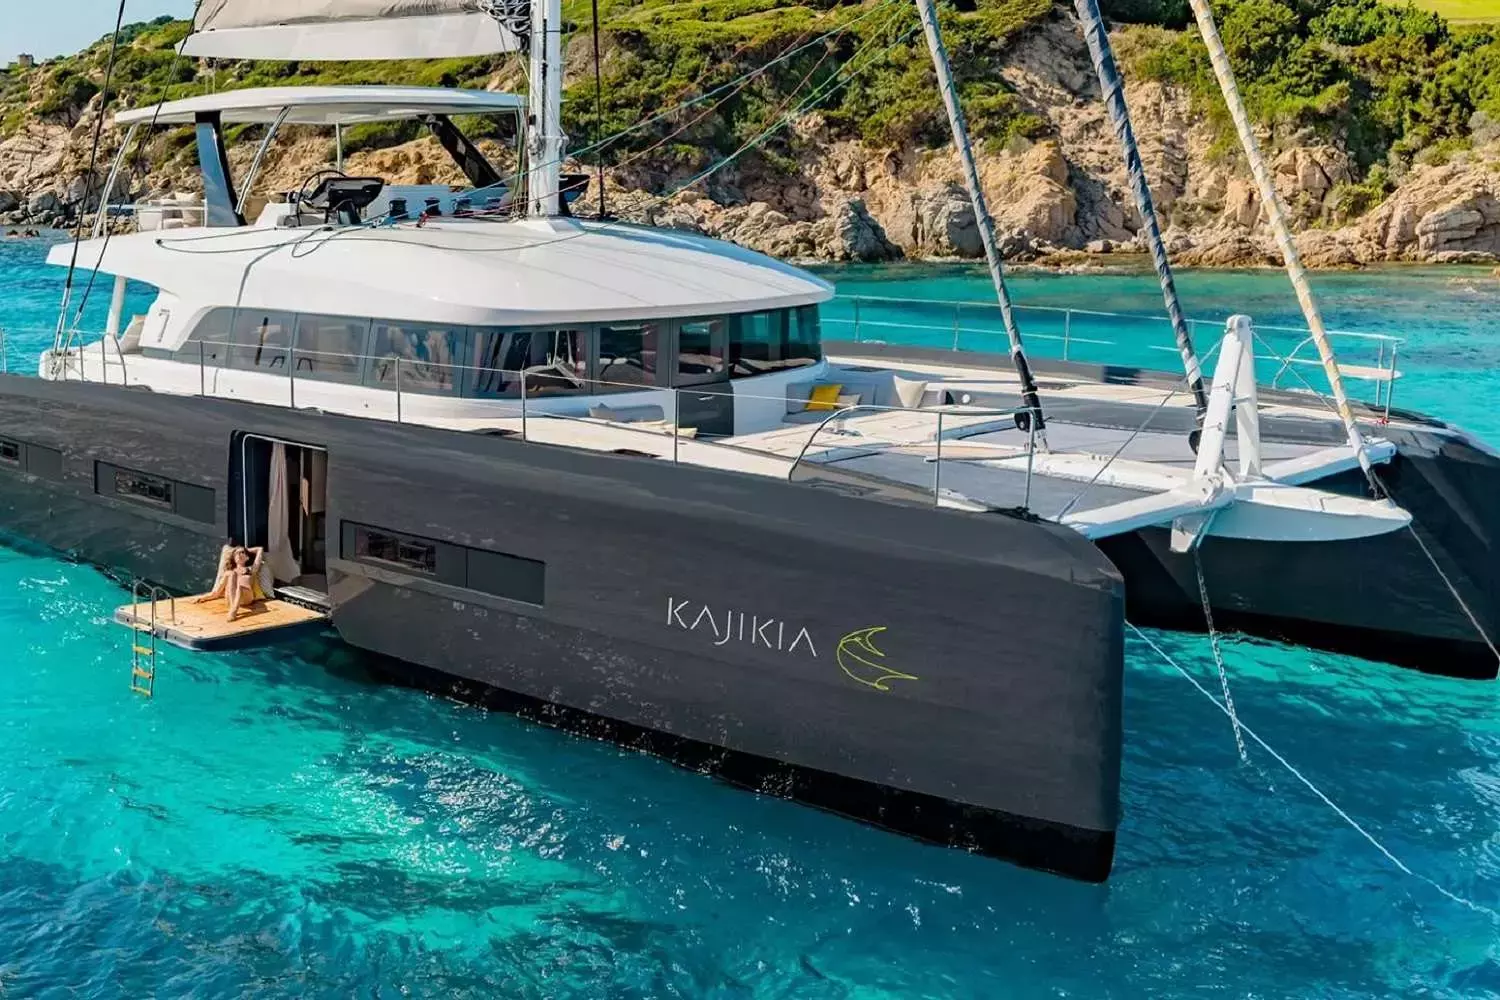 Kajikia by Lagoon - Top rates for a Rental of a private Luxury Catamaran in France